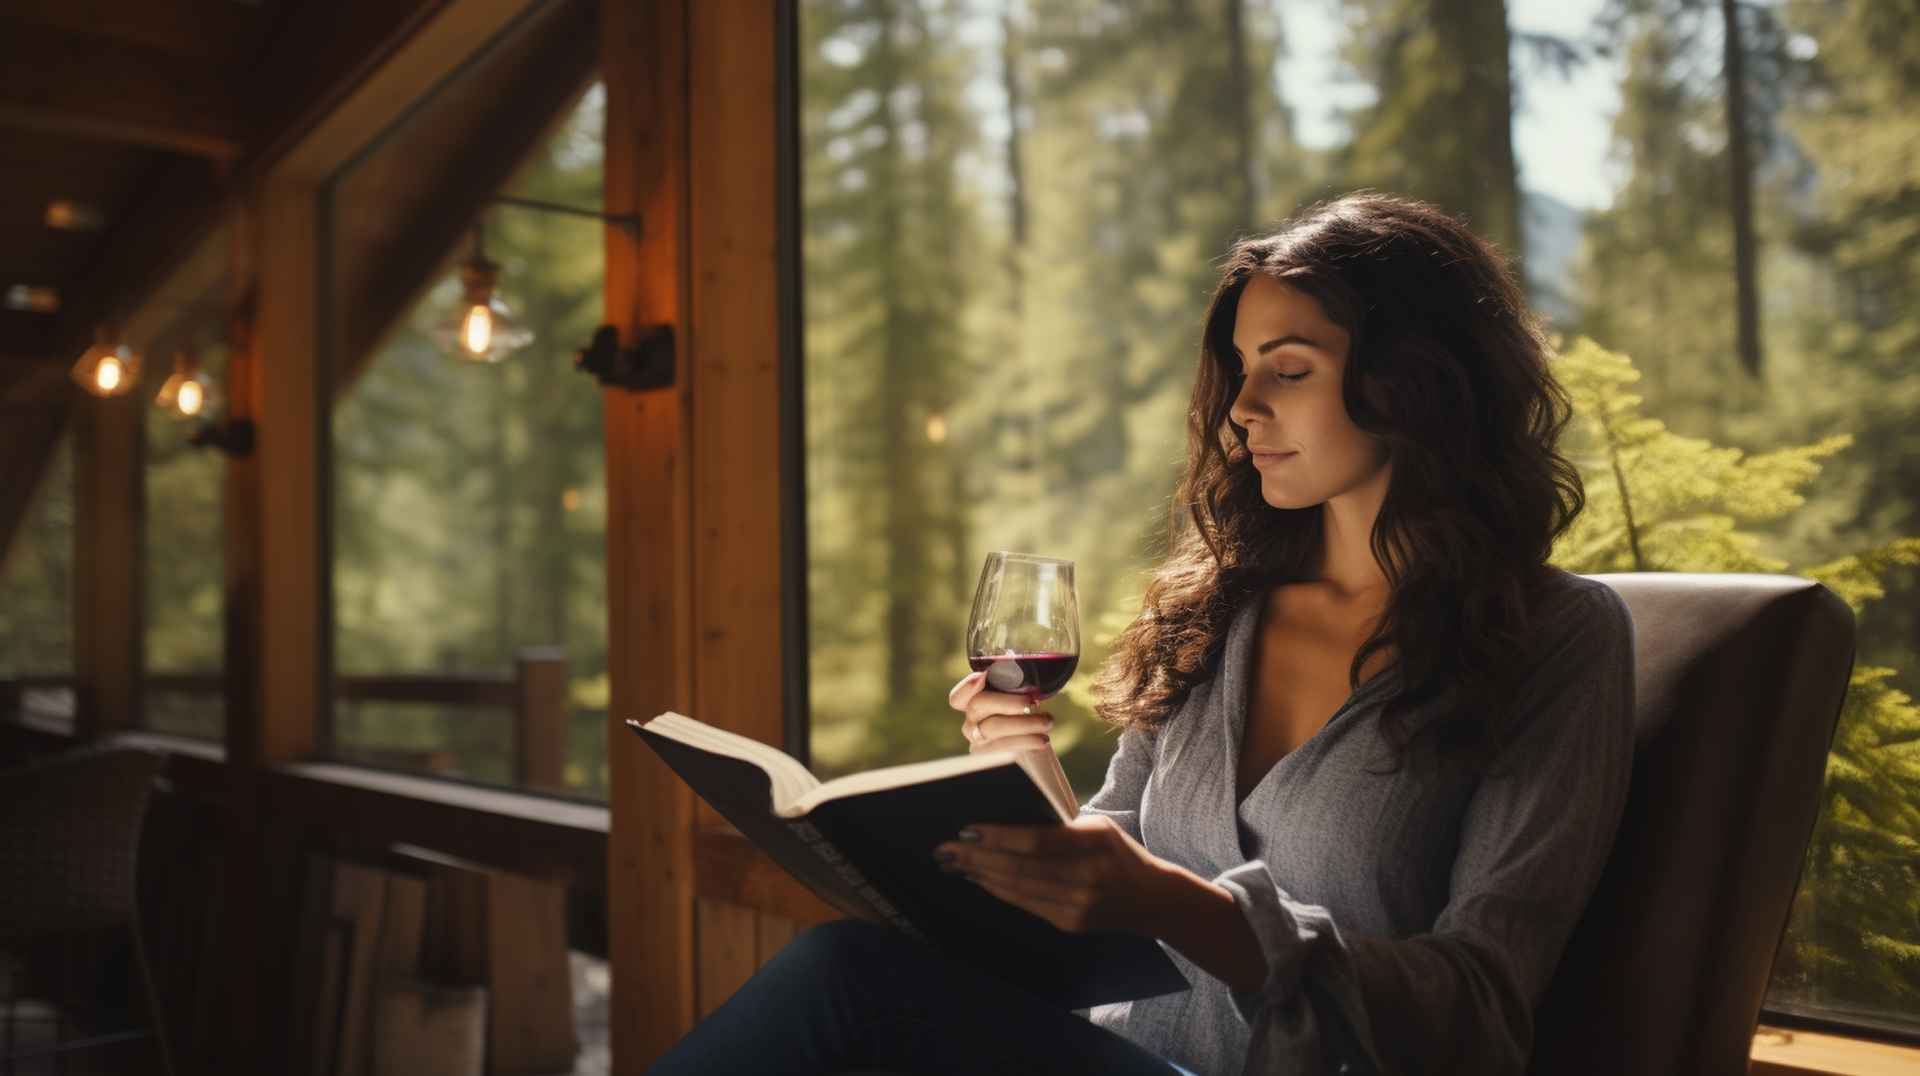 An attractive woman reads a book about wine while sipping a glass of wine. He is sitting in a cozy, biophilic designed cafe with the forest and mountains in the background.